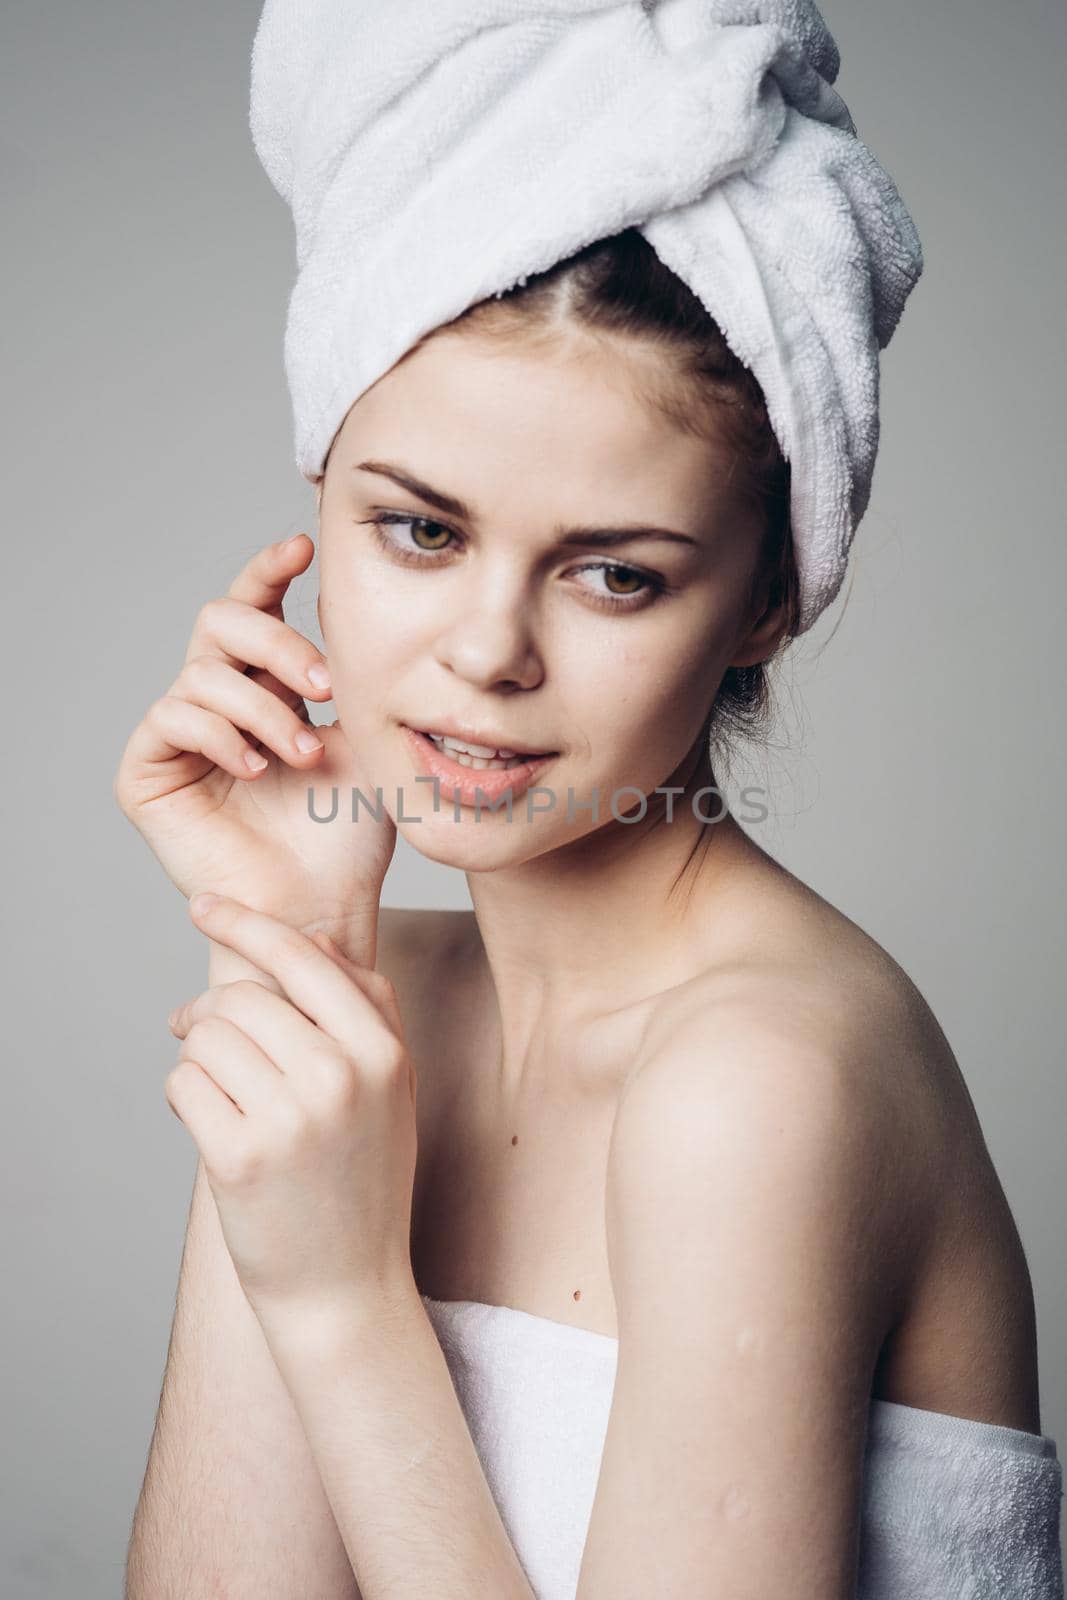 woman after shower with towel on head posing skin care by Vichizh